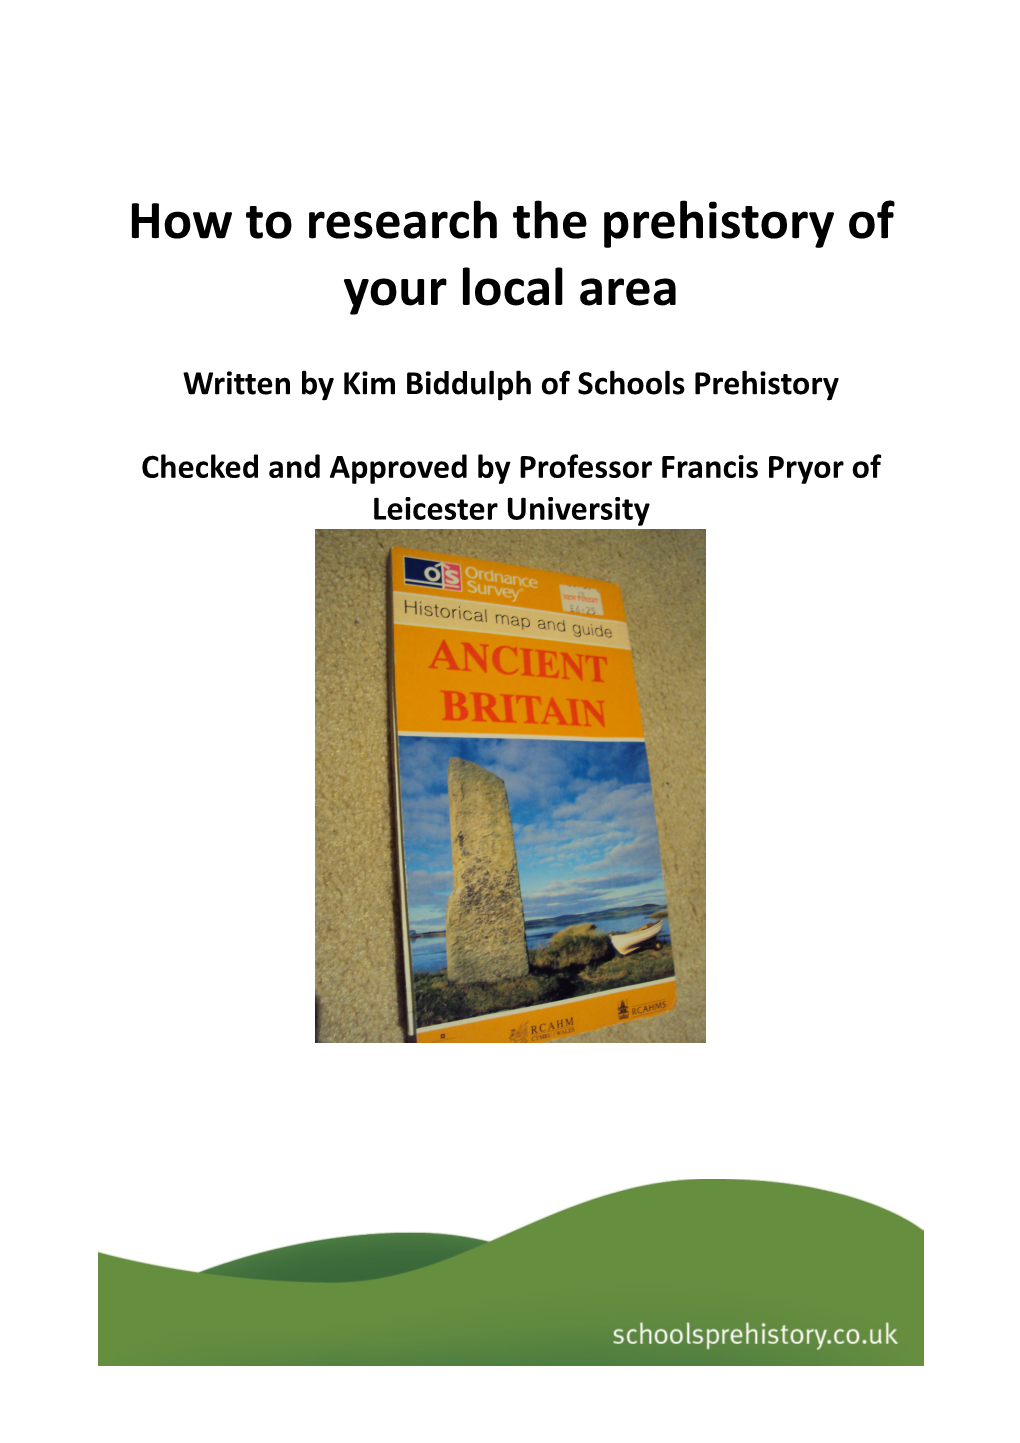 How to Research the Prehistory of Your Local Area